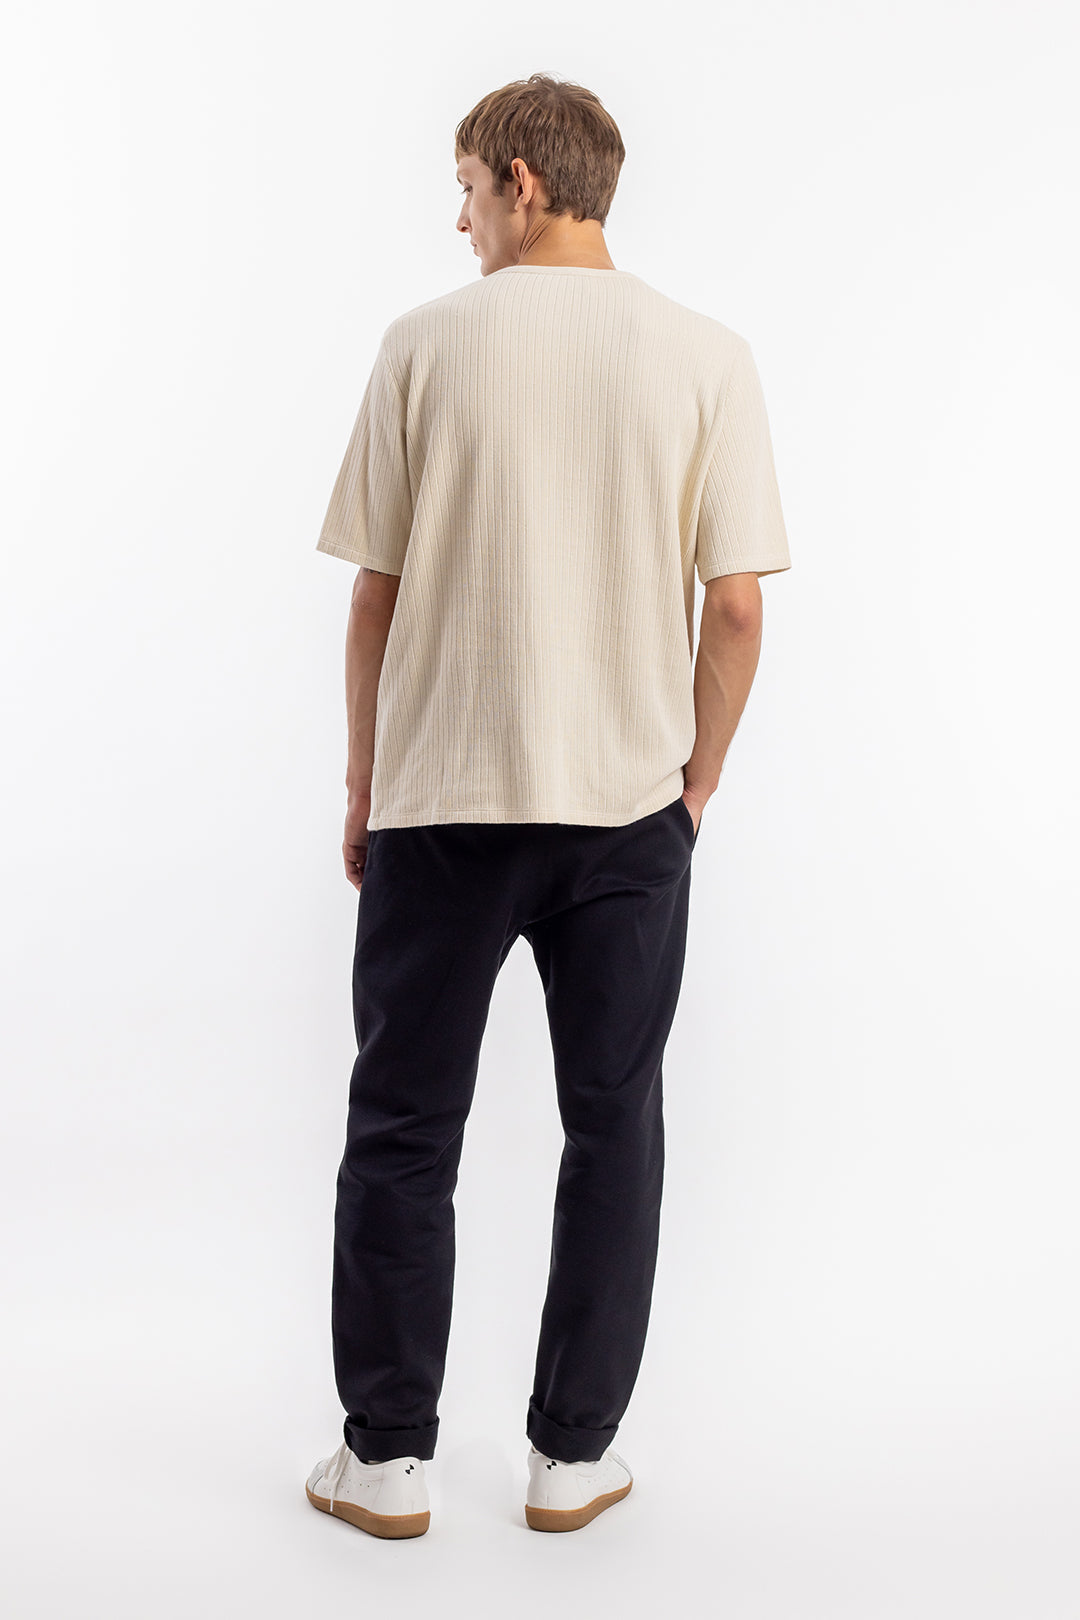 Cream white, ribbed T-shirt made from 100% organic cotton from Rotholz